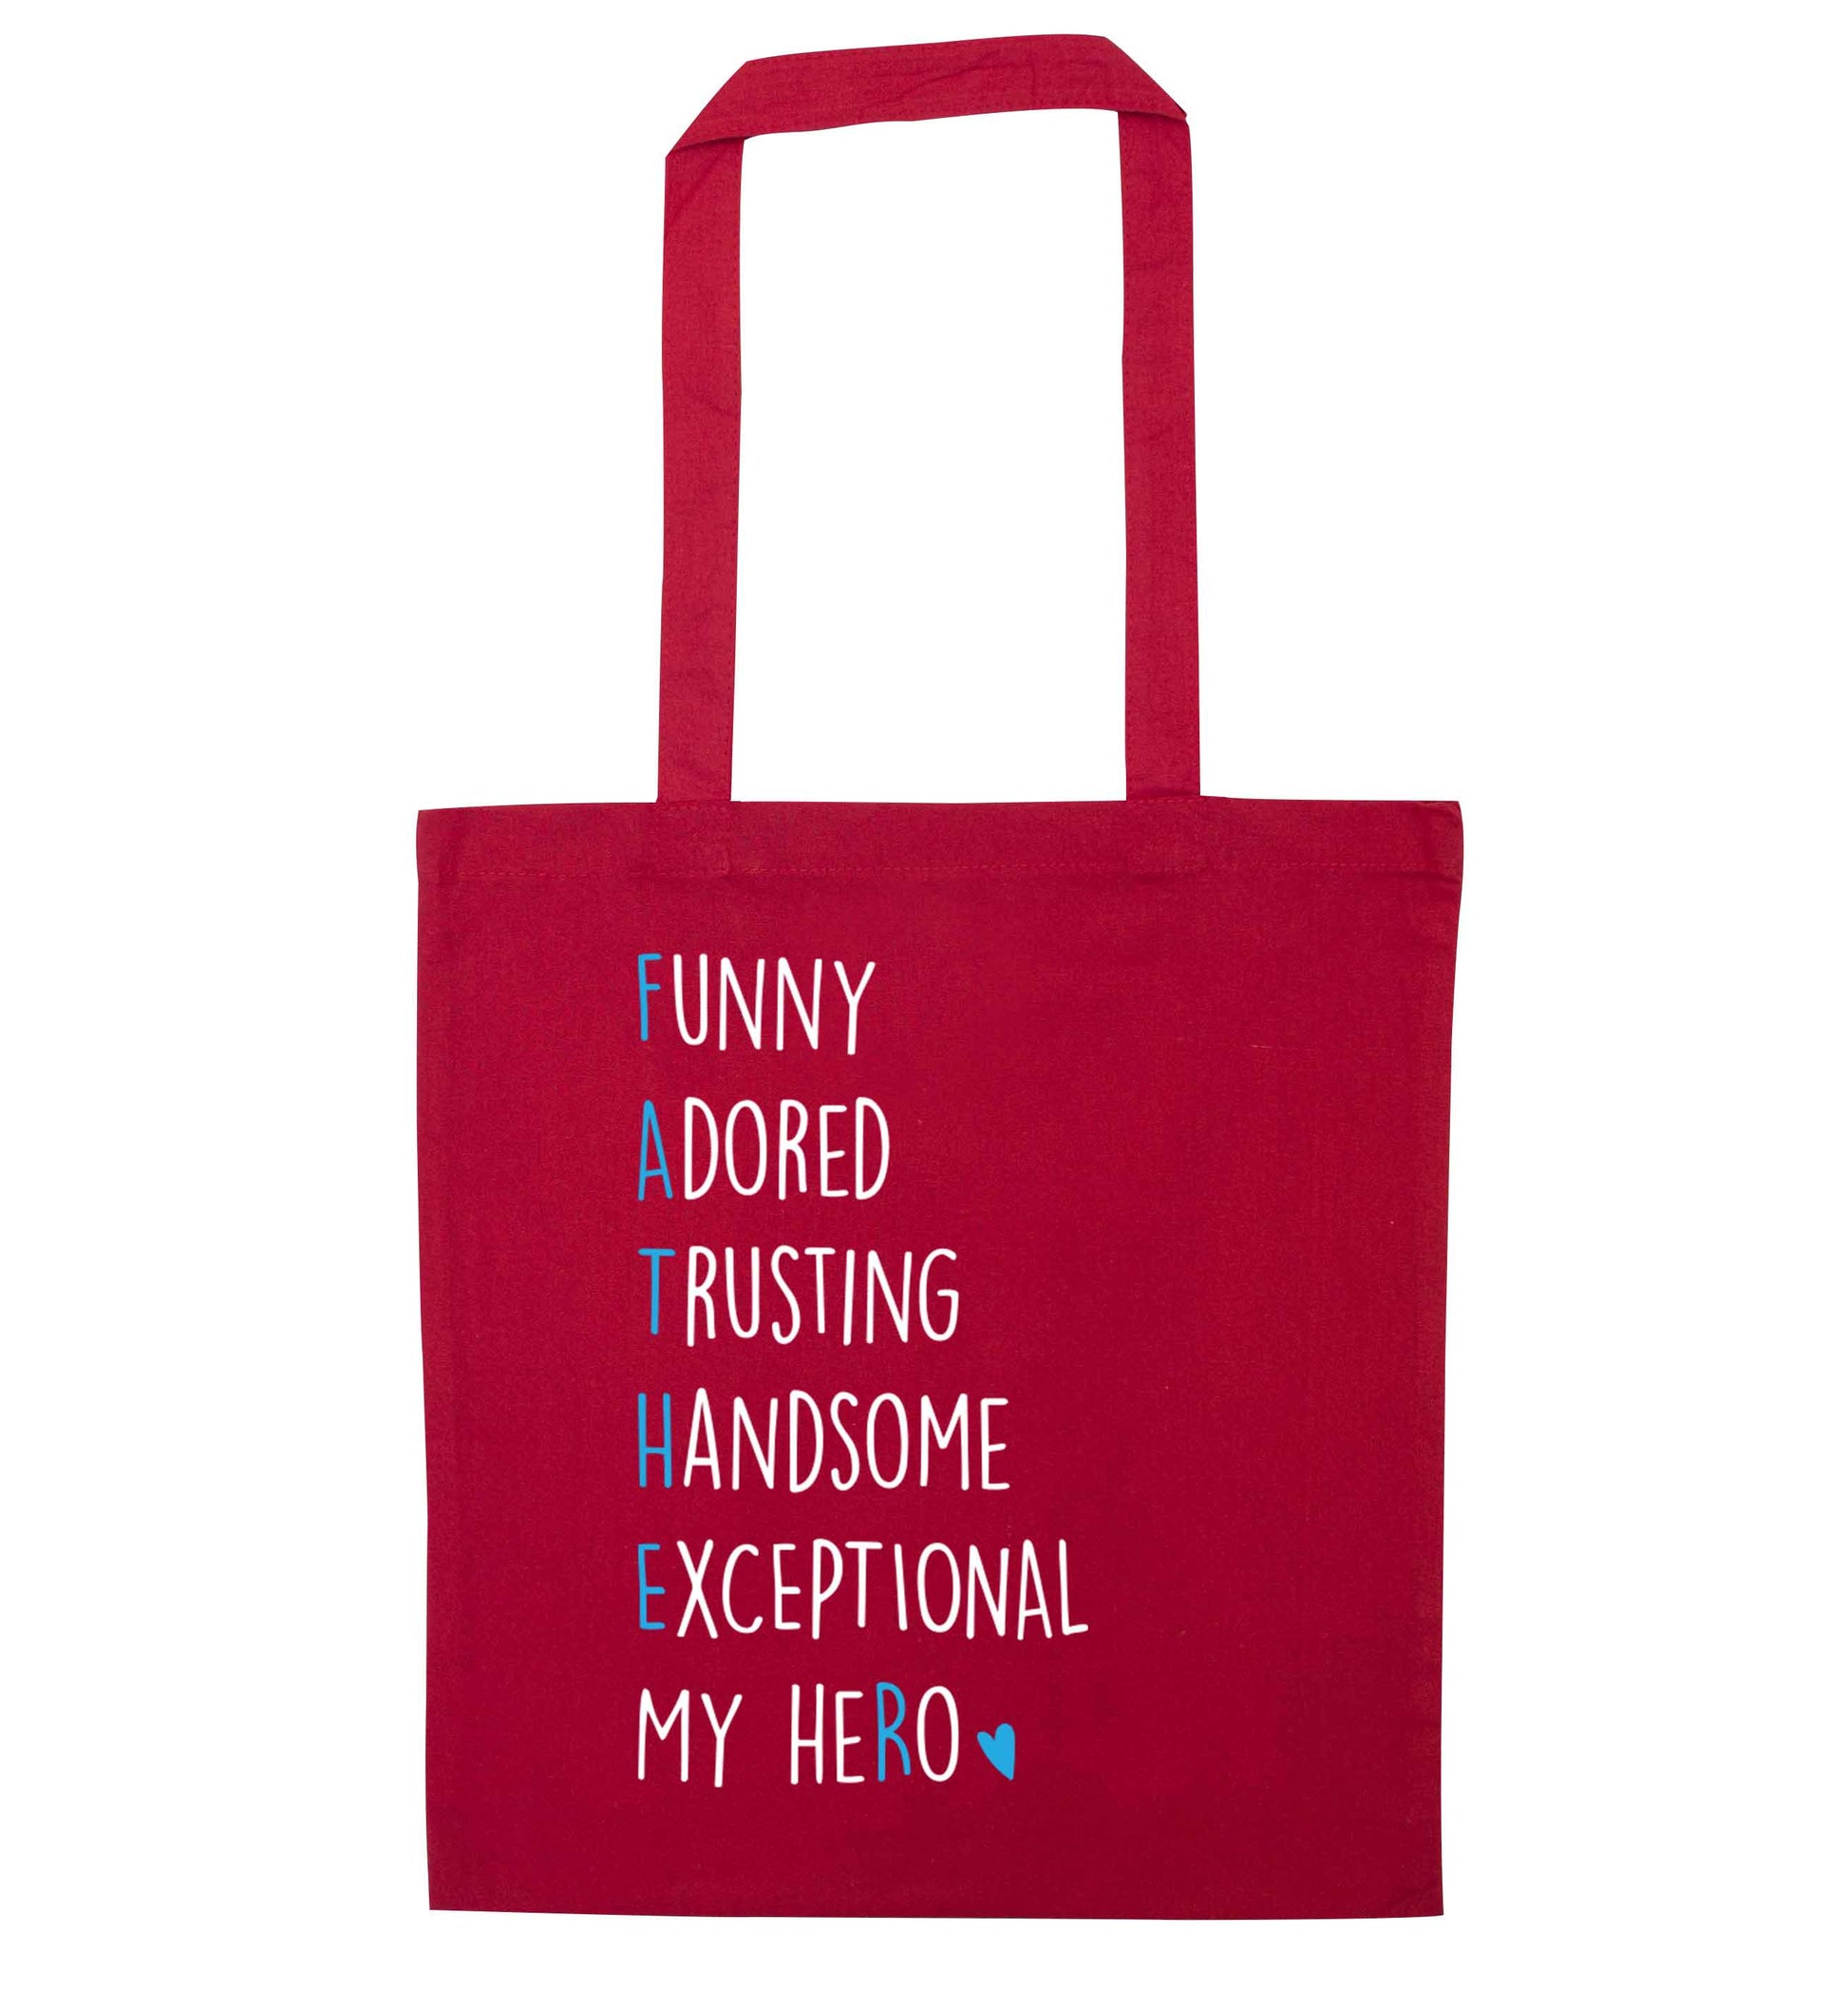 Father meaning hero acrostic poem red tote bag